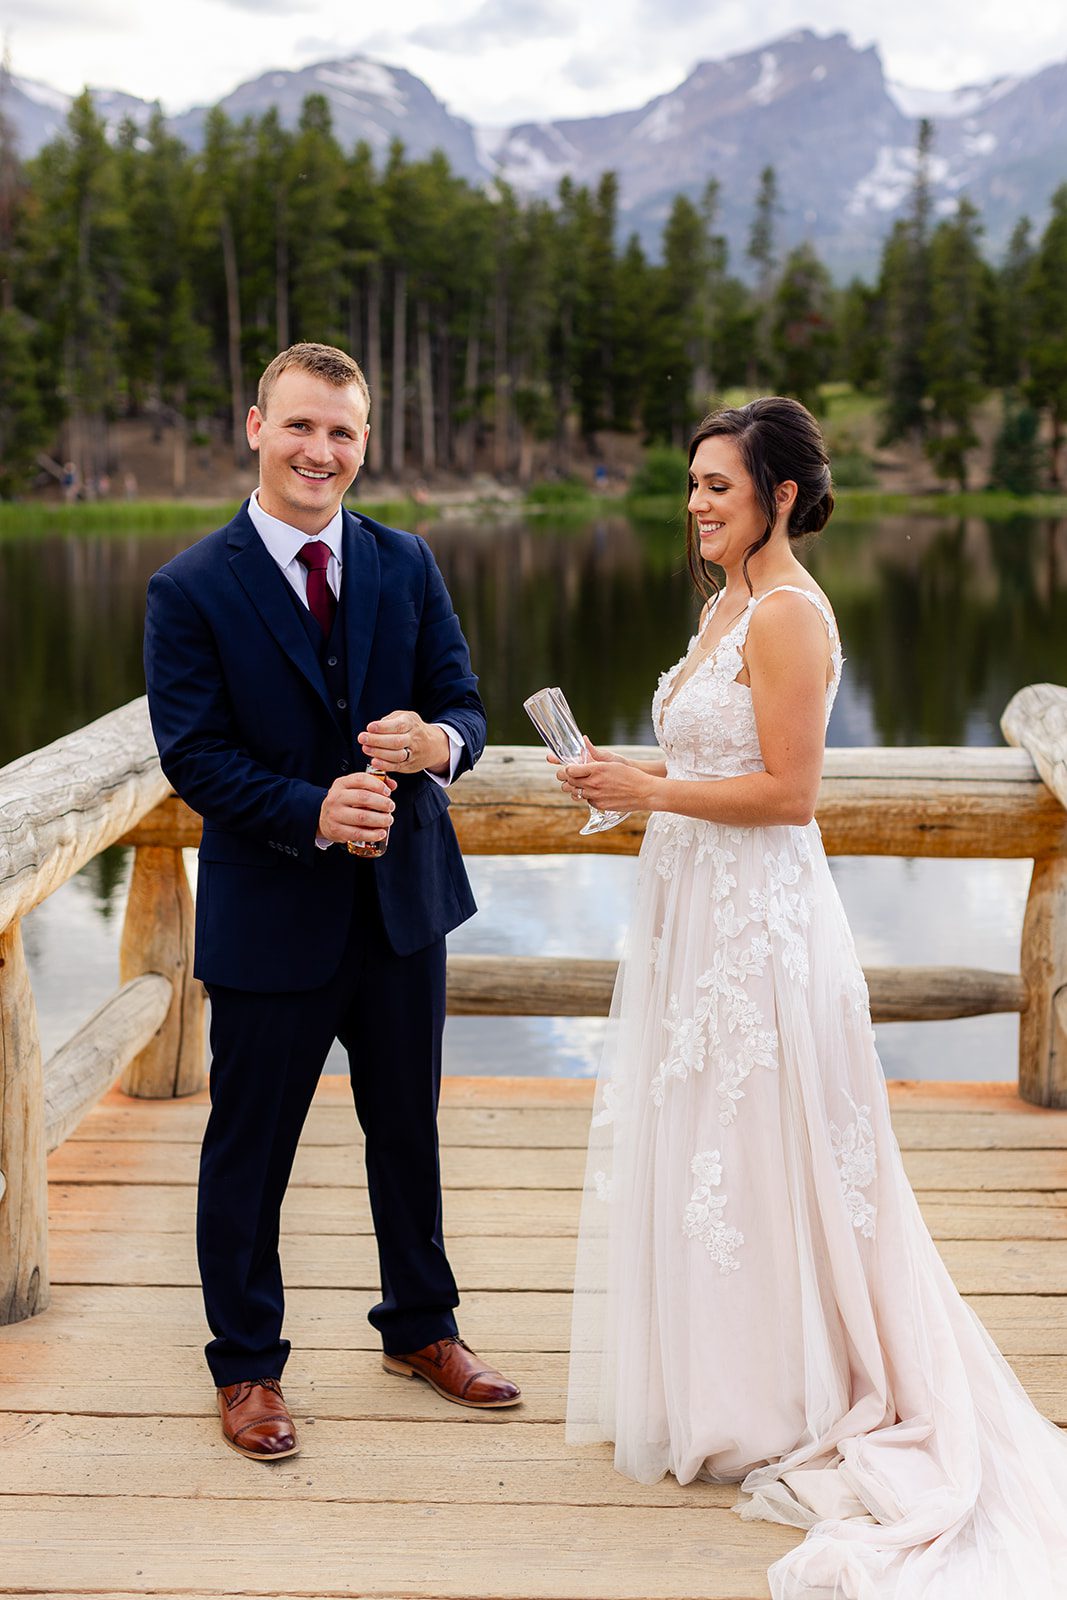 Groom opening champag bottle to celebrate after their elopement ceremony at Sprague Lake